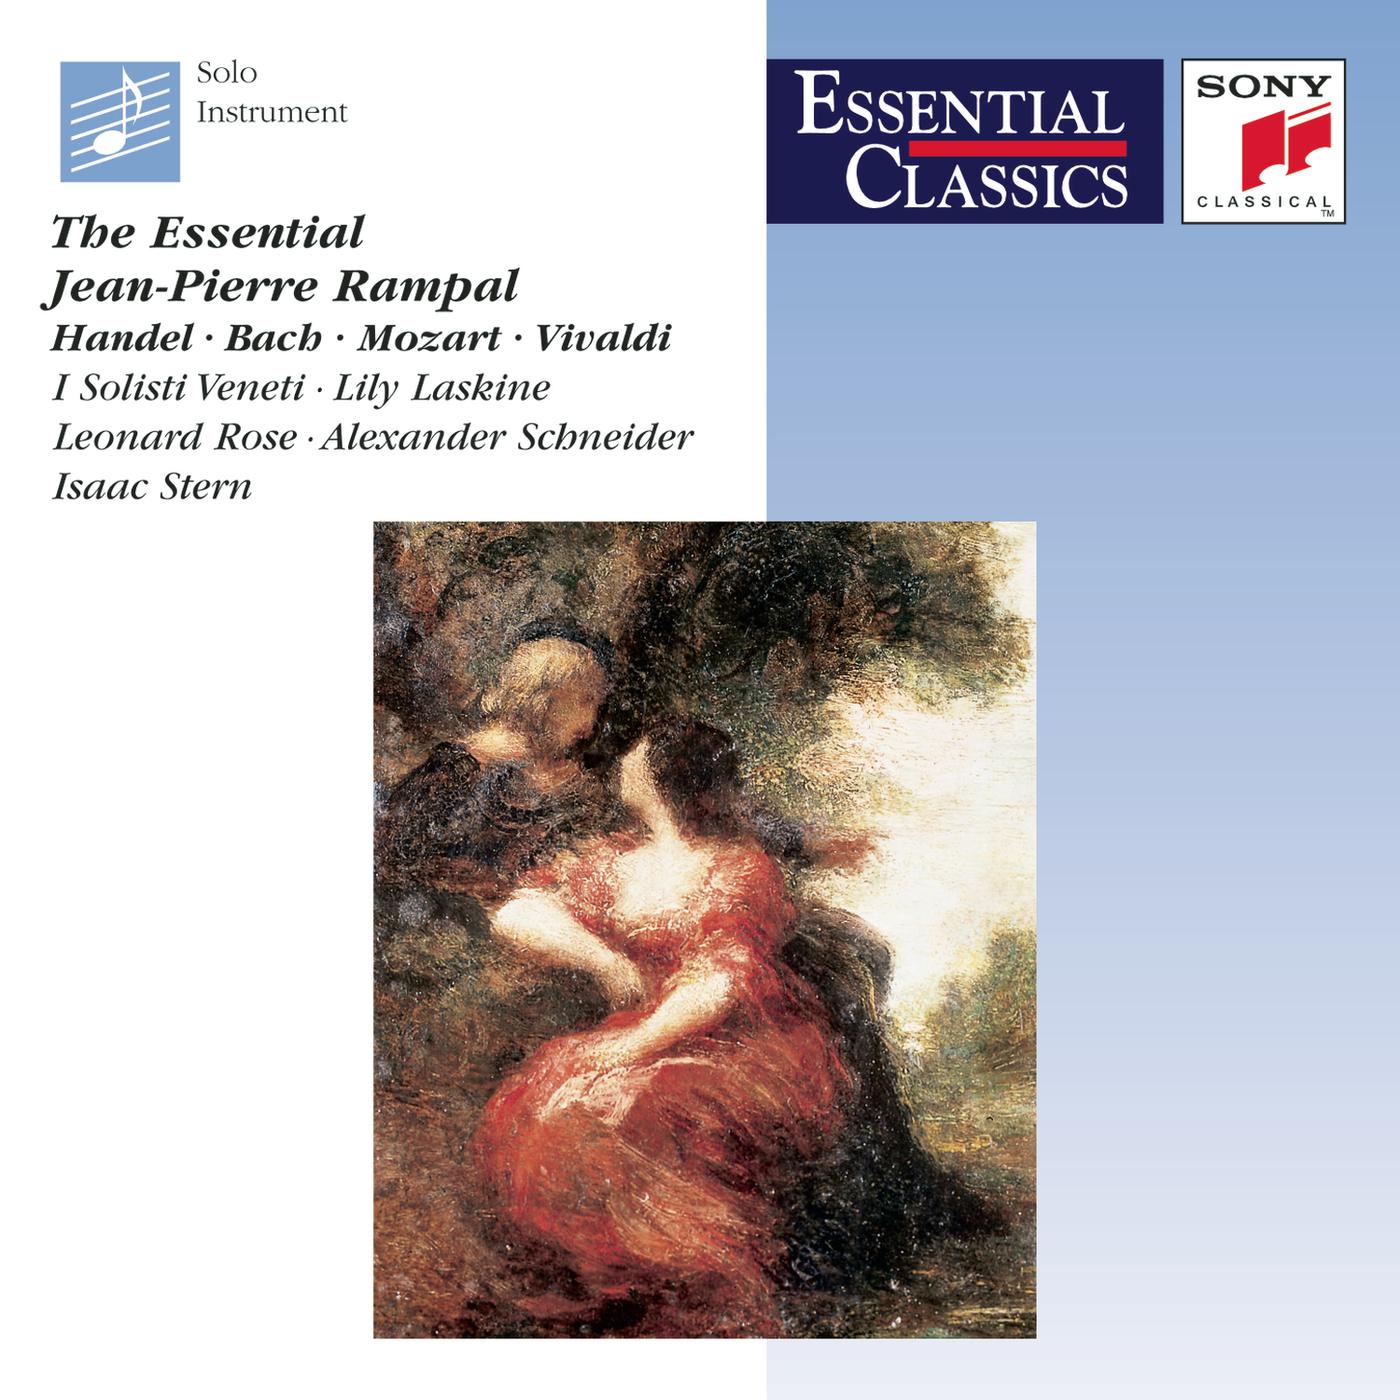 Concerto in D Major, Op. 10, No. 3: Cantabile and Allegro